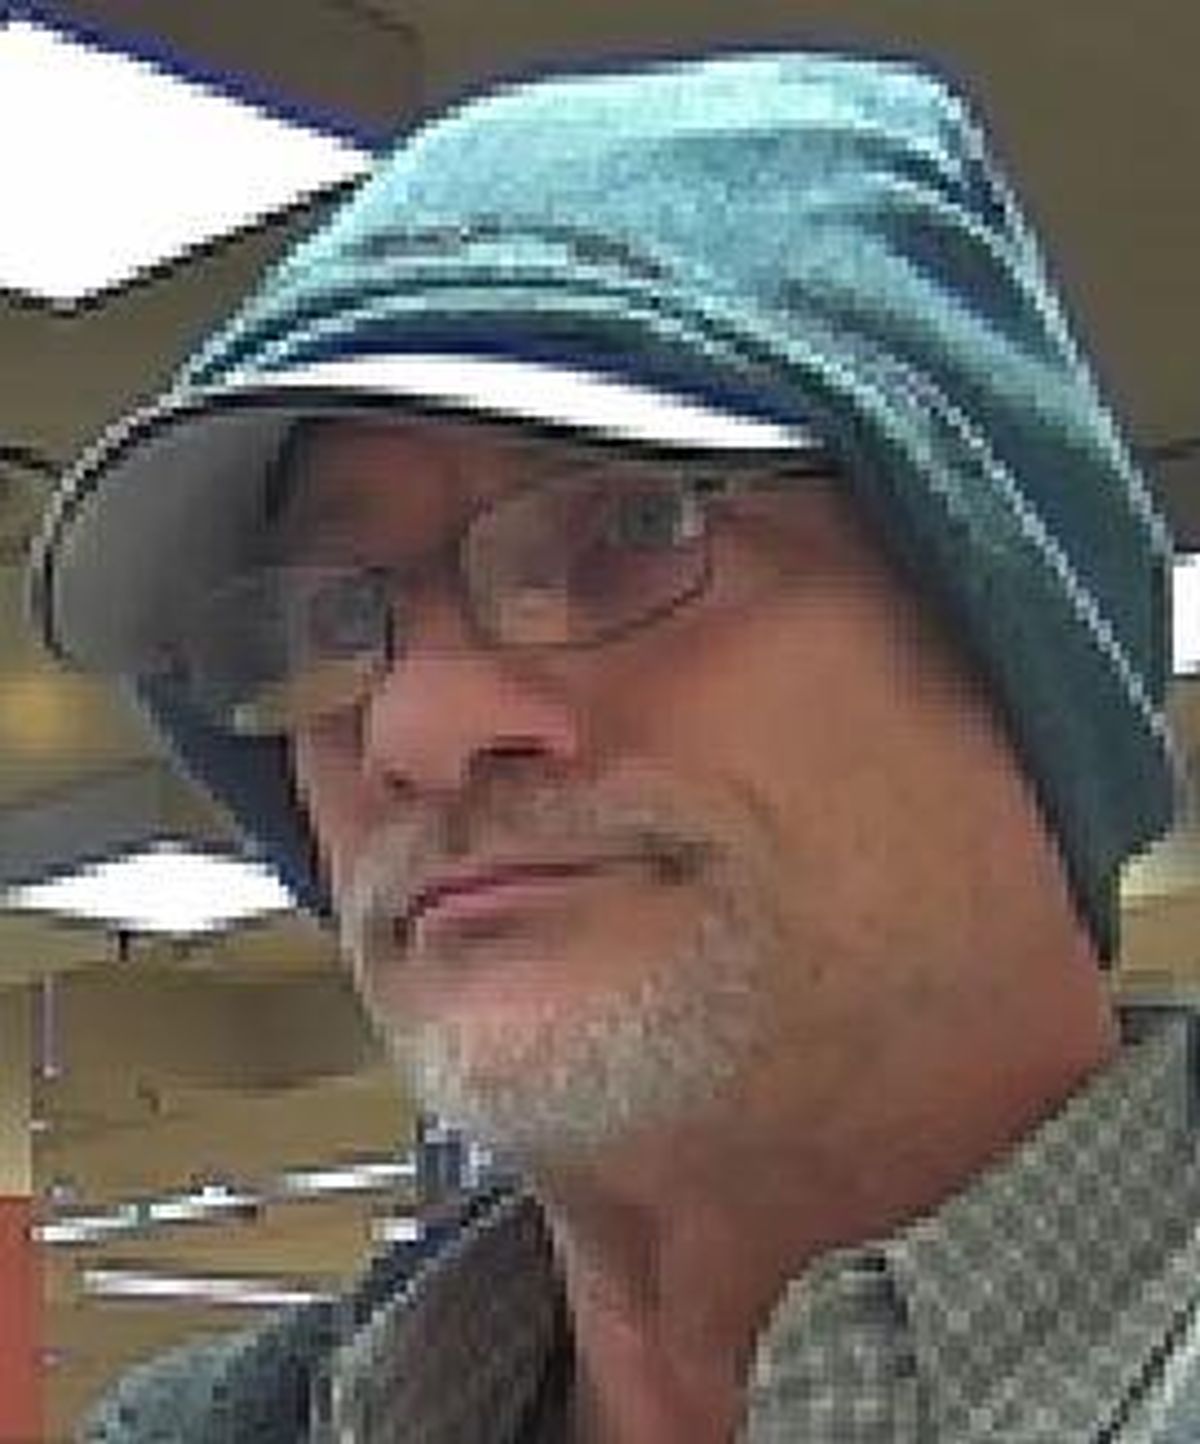 A man believed to be the so-called “Double Hat Bandit” is wanted by the FBI for a series of robberies across multiple states. (FBI)